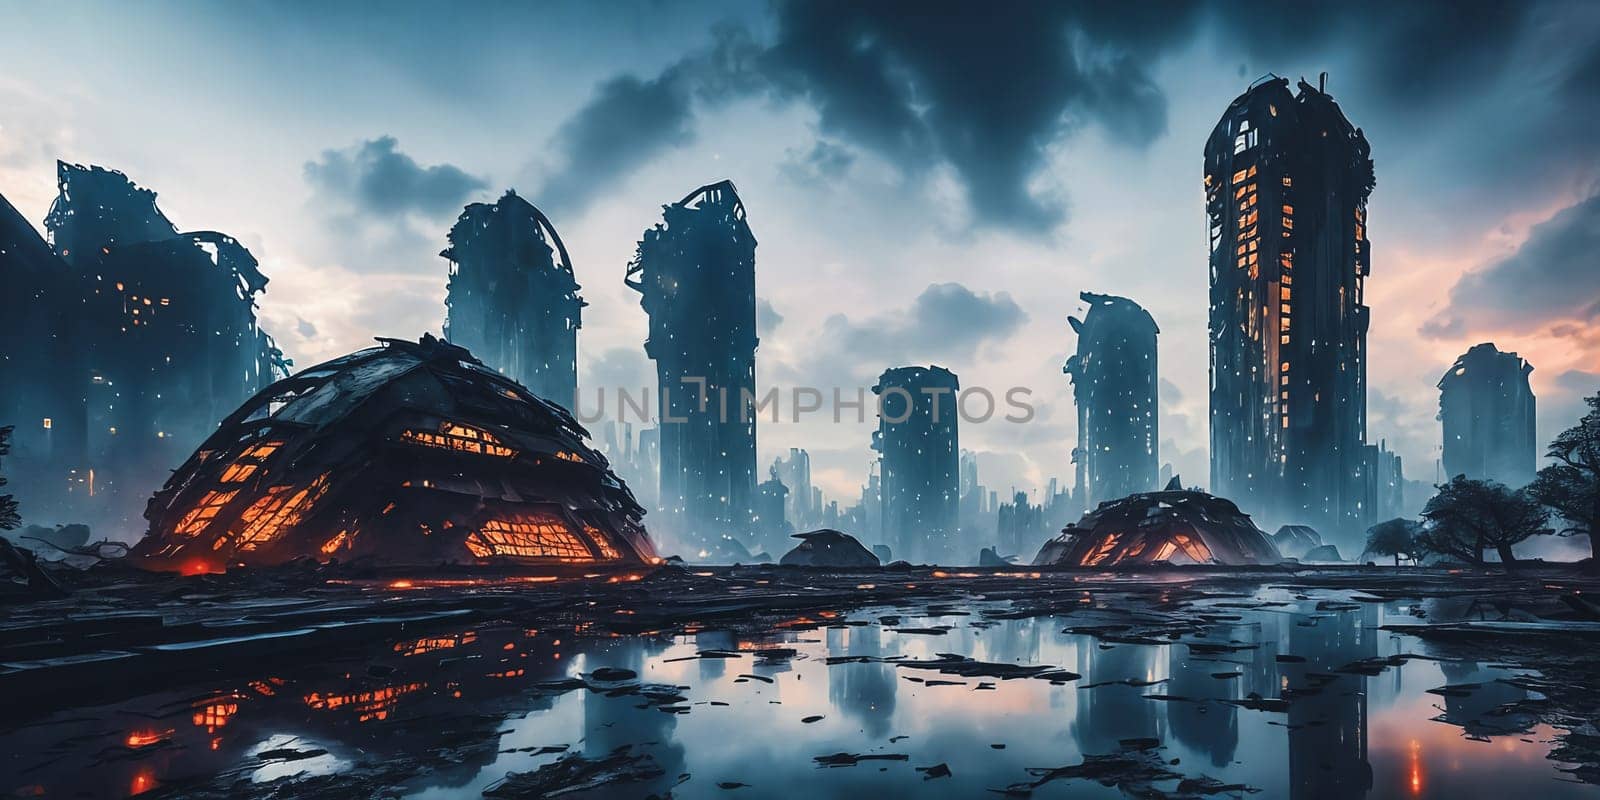 Ruins of a Futuristic Society. Futuristic buildings in ruins, featuring crumbling high-tech architecture, holographic signs flickering, and remnants of advanced technology scattered around.